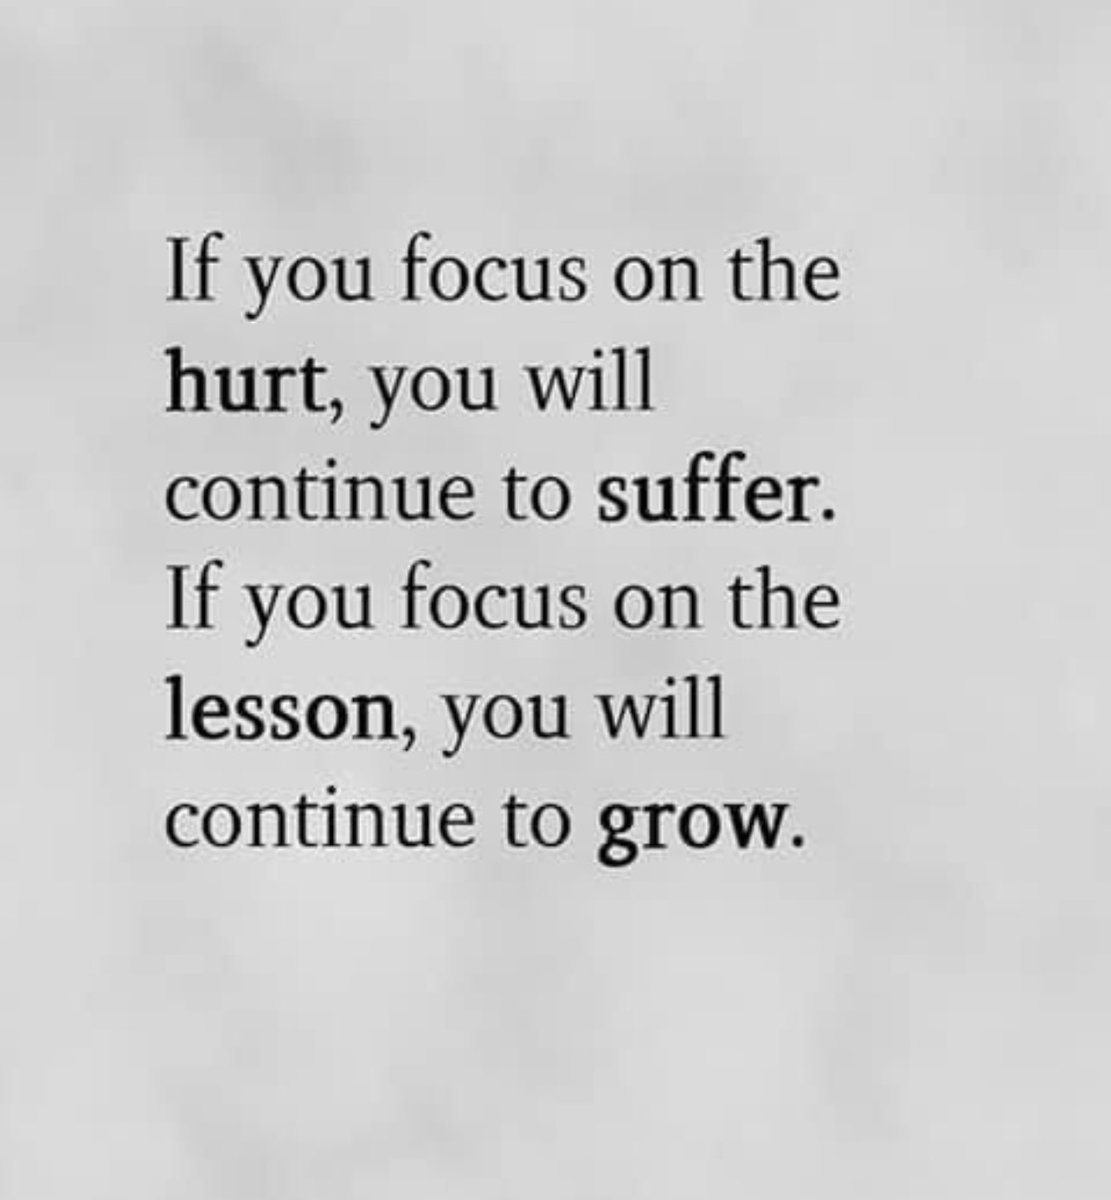 #WeekendWisdom there is much to be learnt from the pain we suffer. The magic happens when we focus on the lesson rather than the hurt.
#Posttraumaticgrowth #mentalhealth #resilience